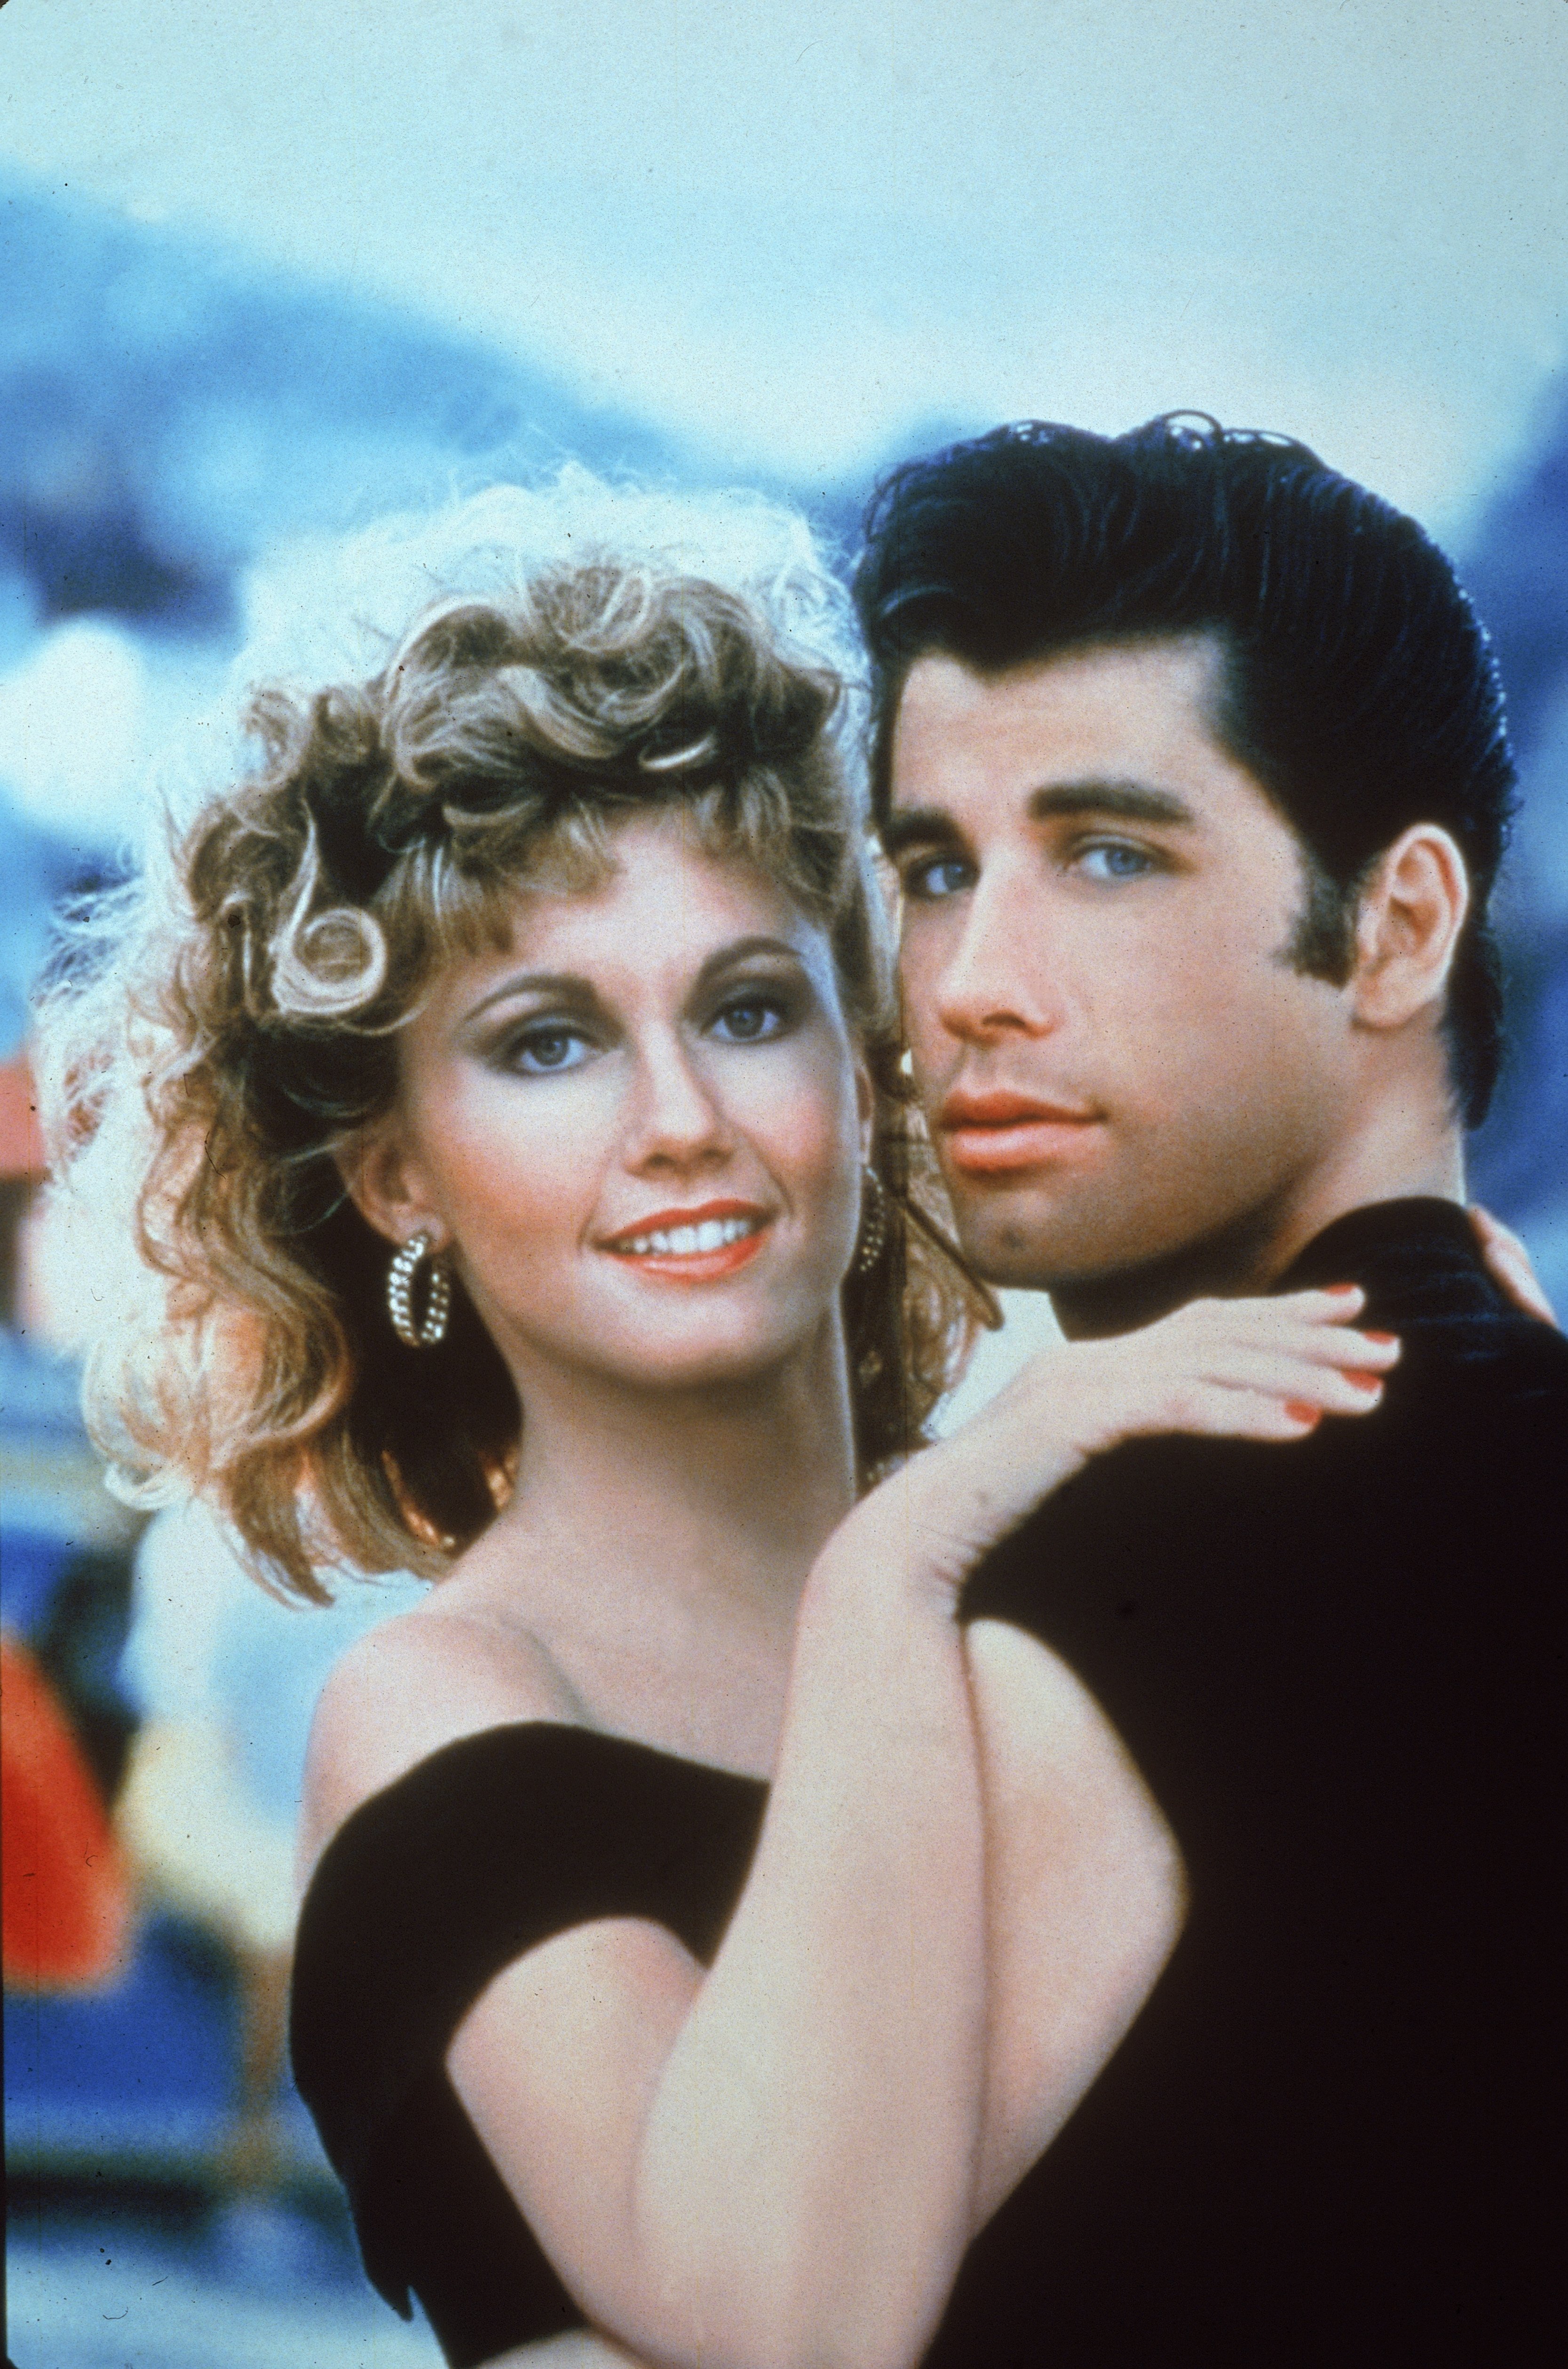 John Travolta and Olivia Newton-John, who had died, embrace in a promotional still for 'Grease'